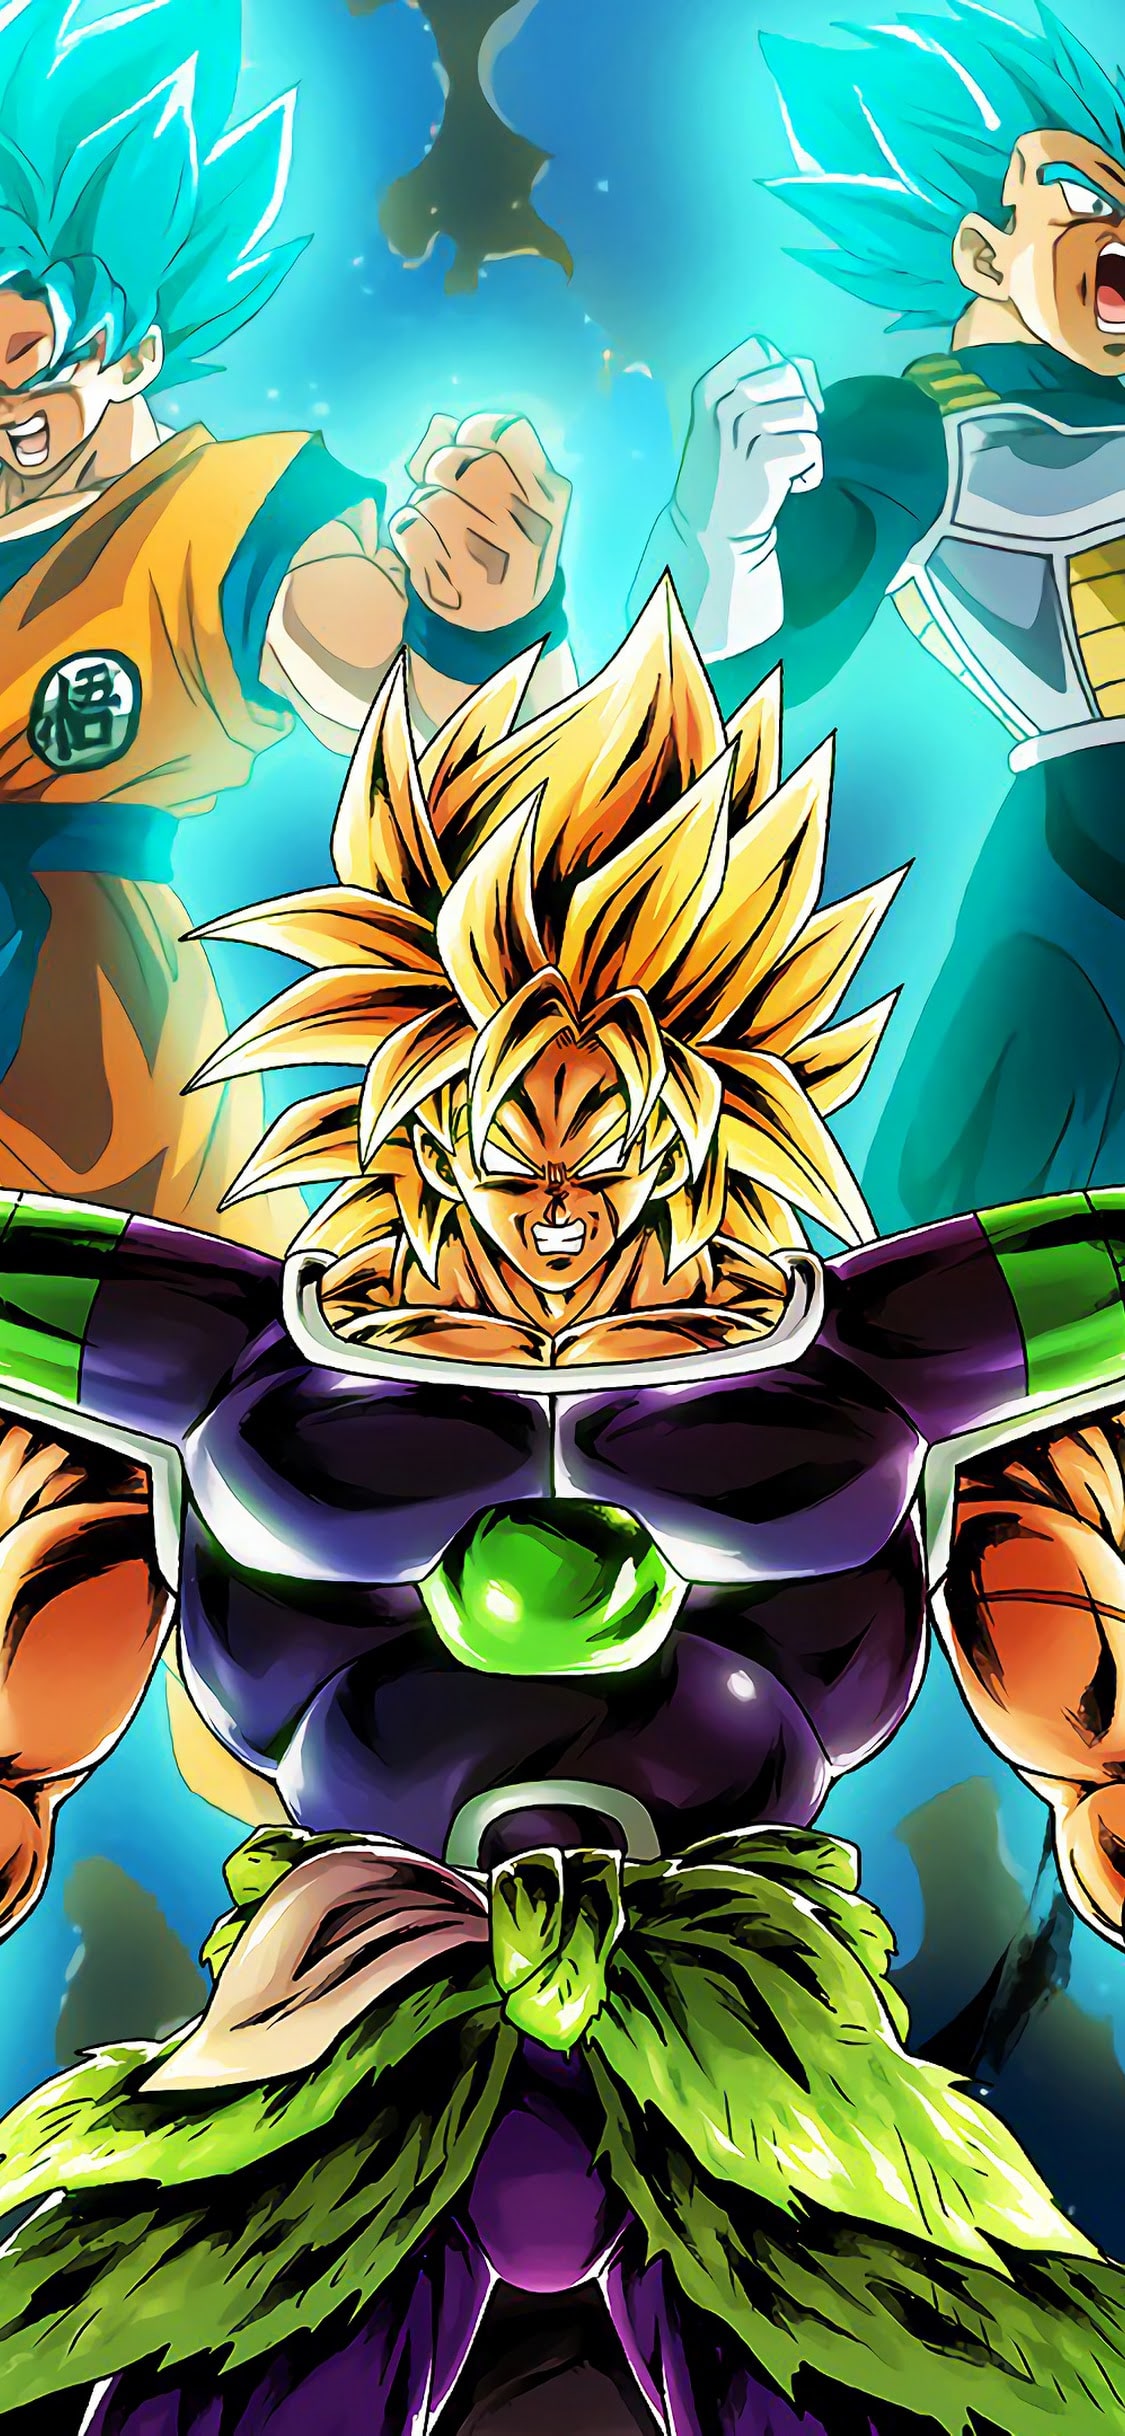 Dragon Ball Z Iphone Wallpapers - KoLPaPer - Awesome Free ...